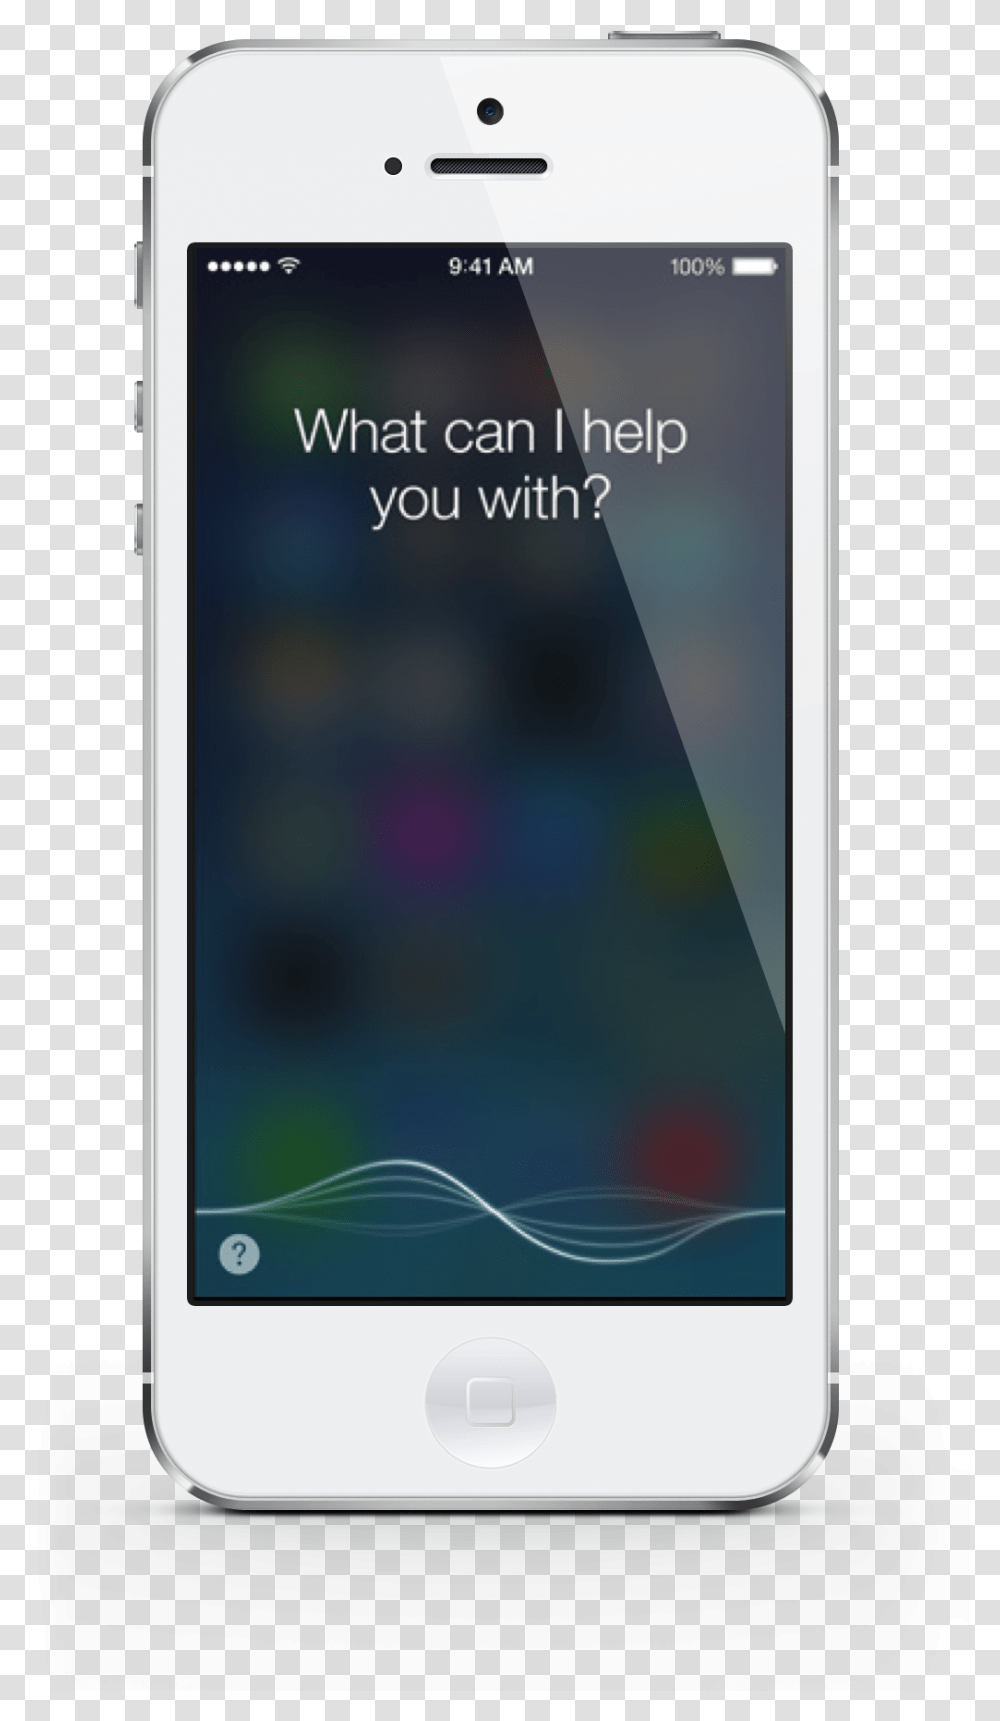 Guide To Using Apples Siri In Ios 7 Siri Iphone, Mobile Phone, Electronics, Cell Phone Transparent Png